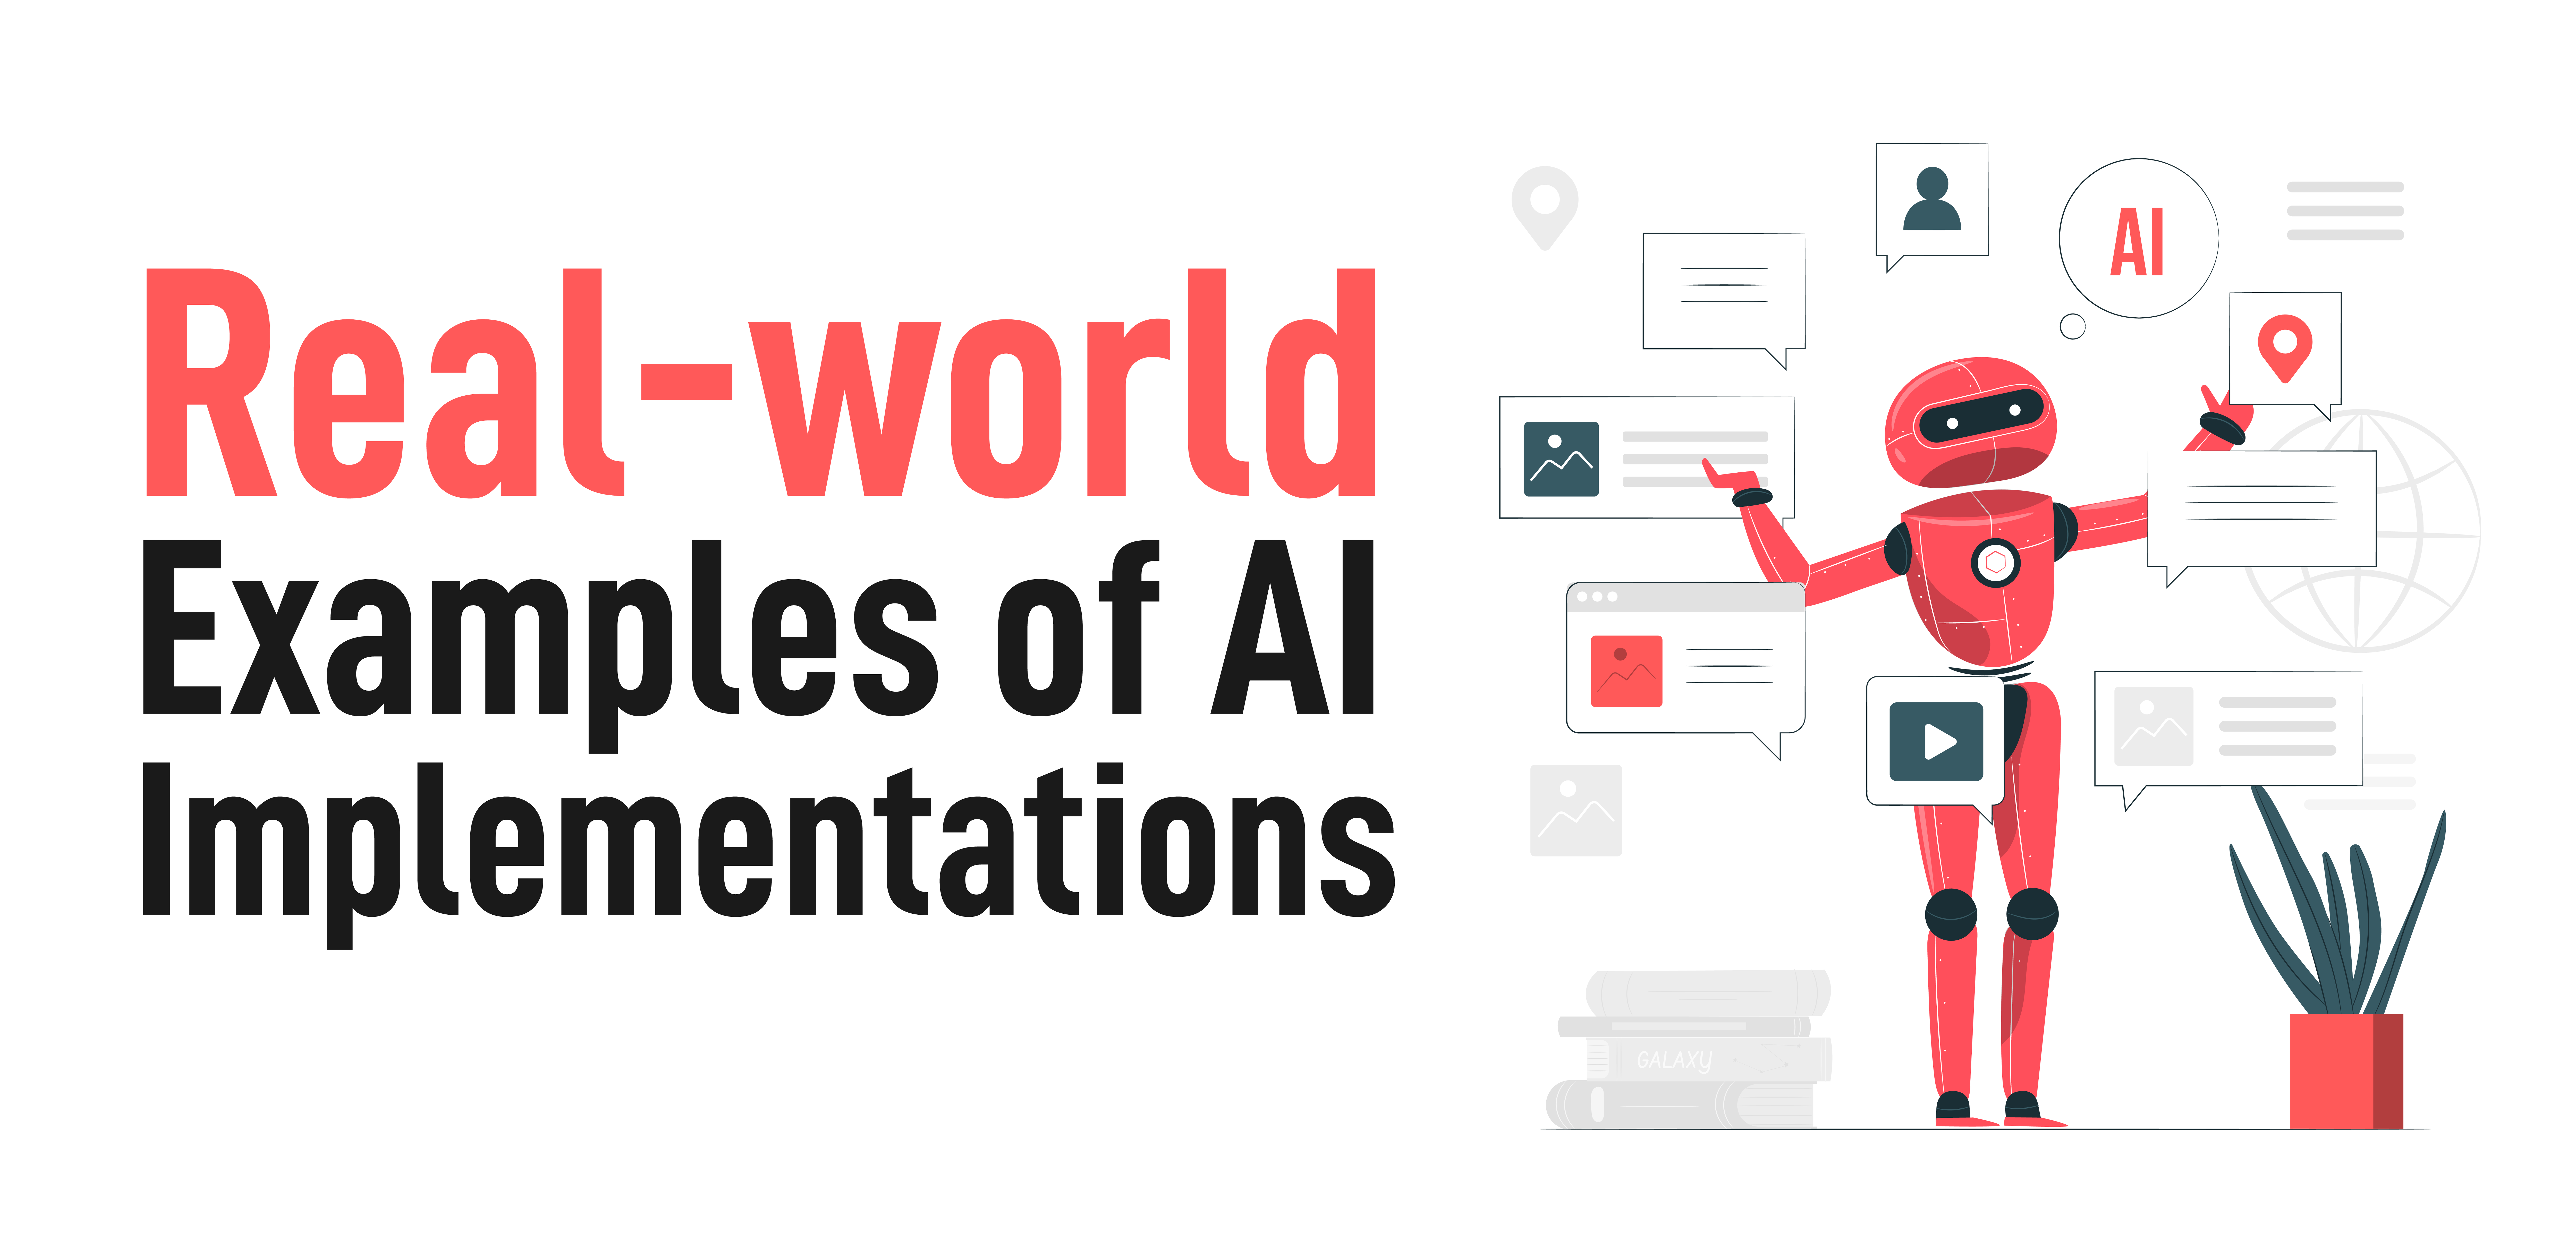 Real-world Examples of AI Implementations